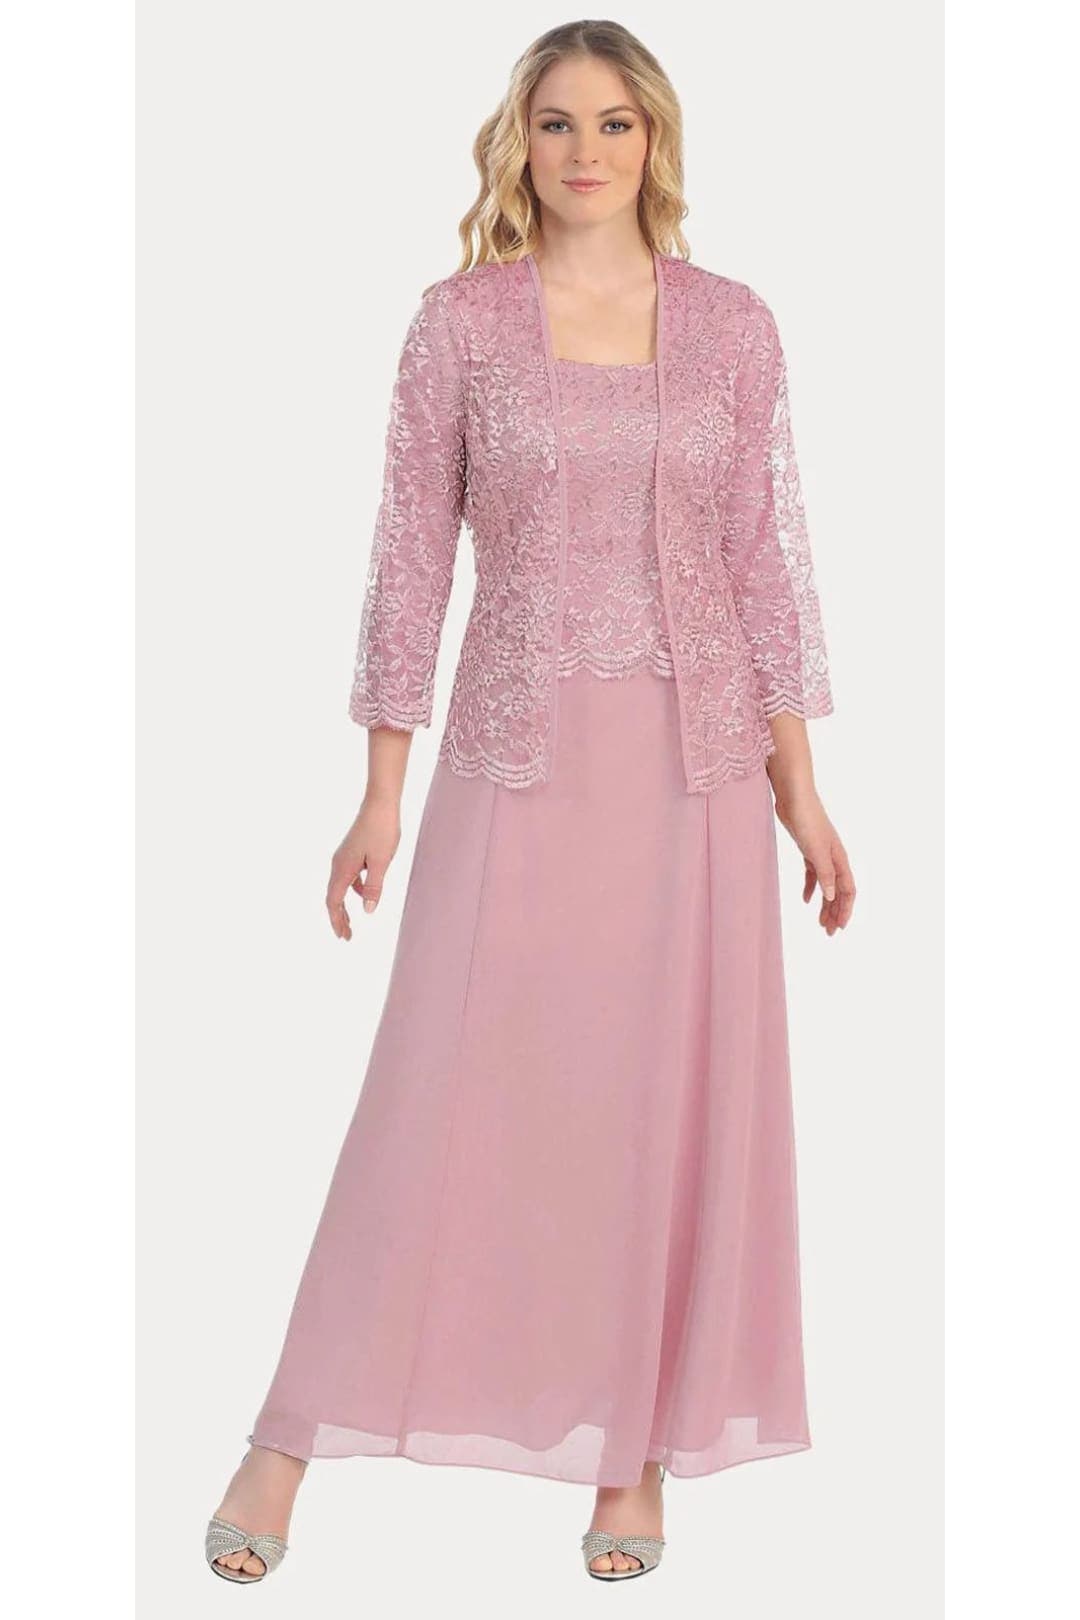 J&J Fashion 8466 Classy Mother Of The Bride Dress - DUSTY ROSE / M